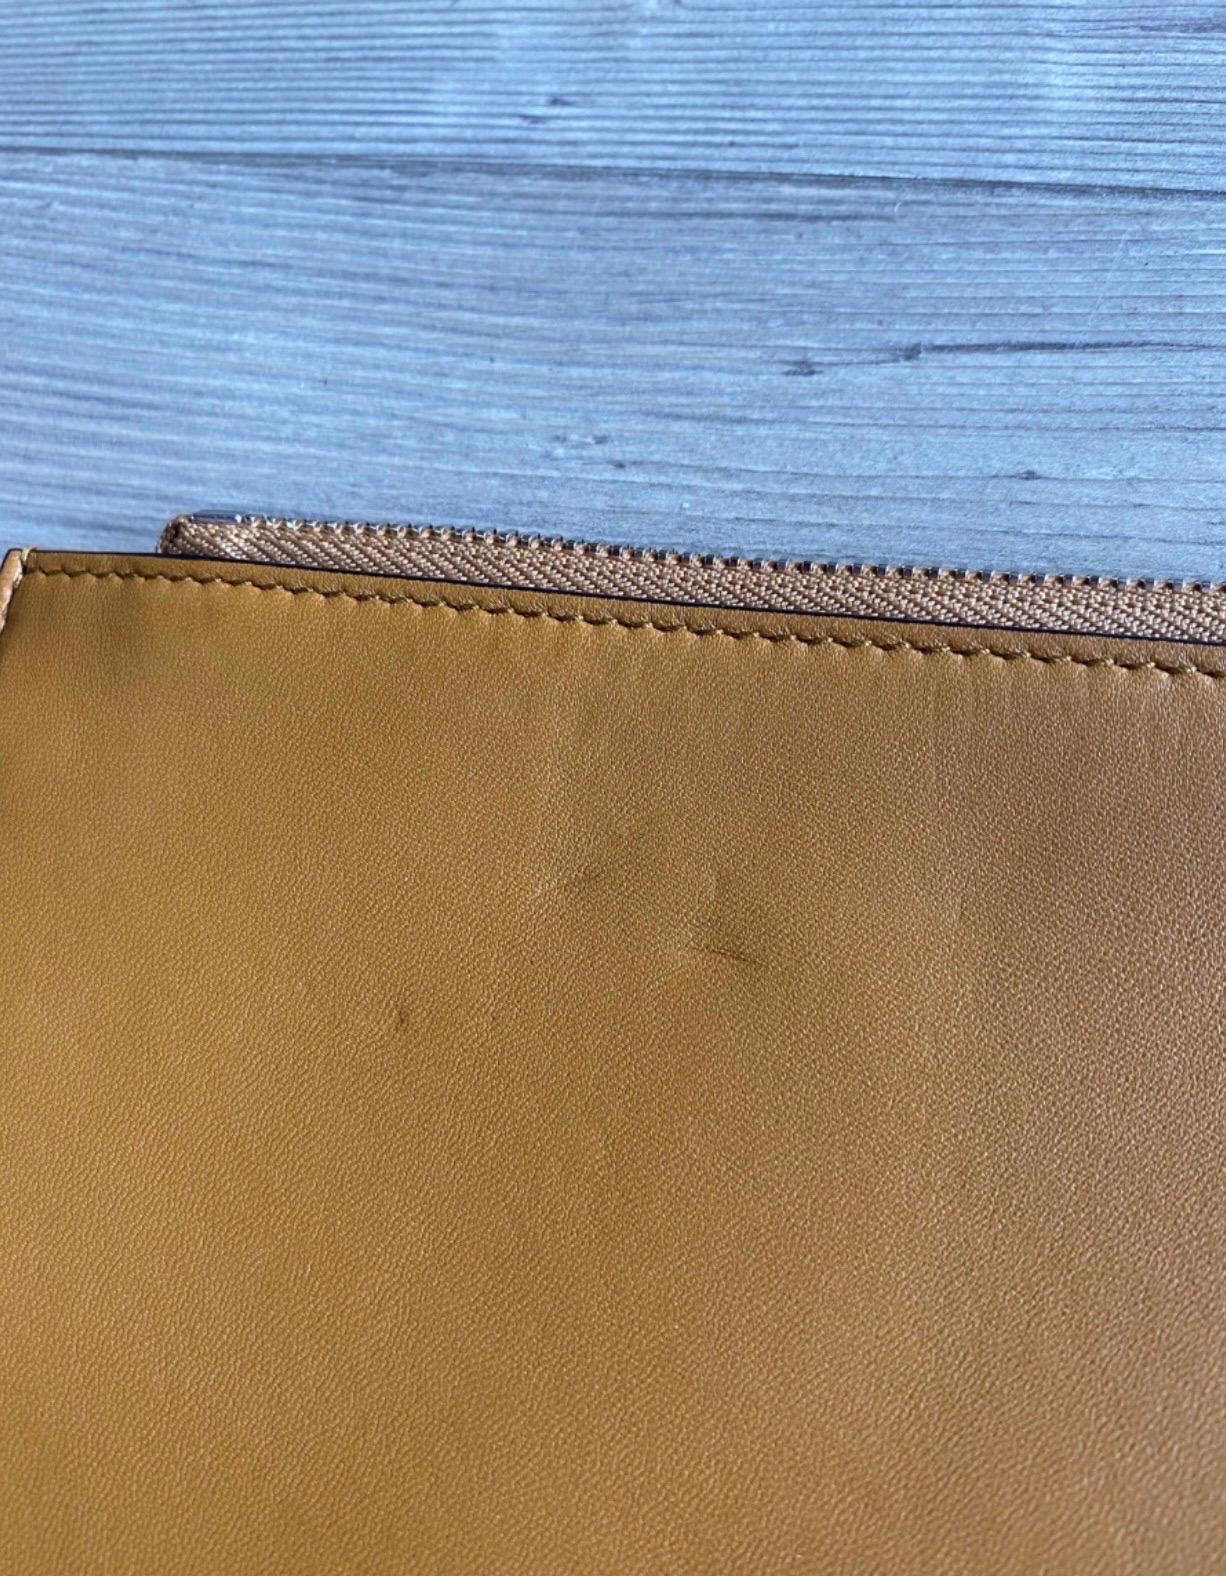 Givenchy clutch bag. in golden brown leather. measurements:
height 24 cm
length 35 cm
Never used but has some marks on the leather as shown in the photo. Very good general conditions.